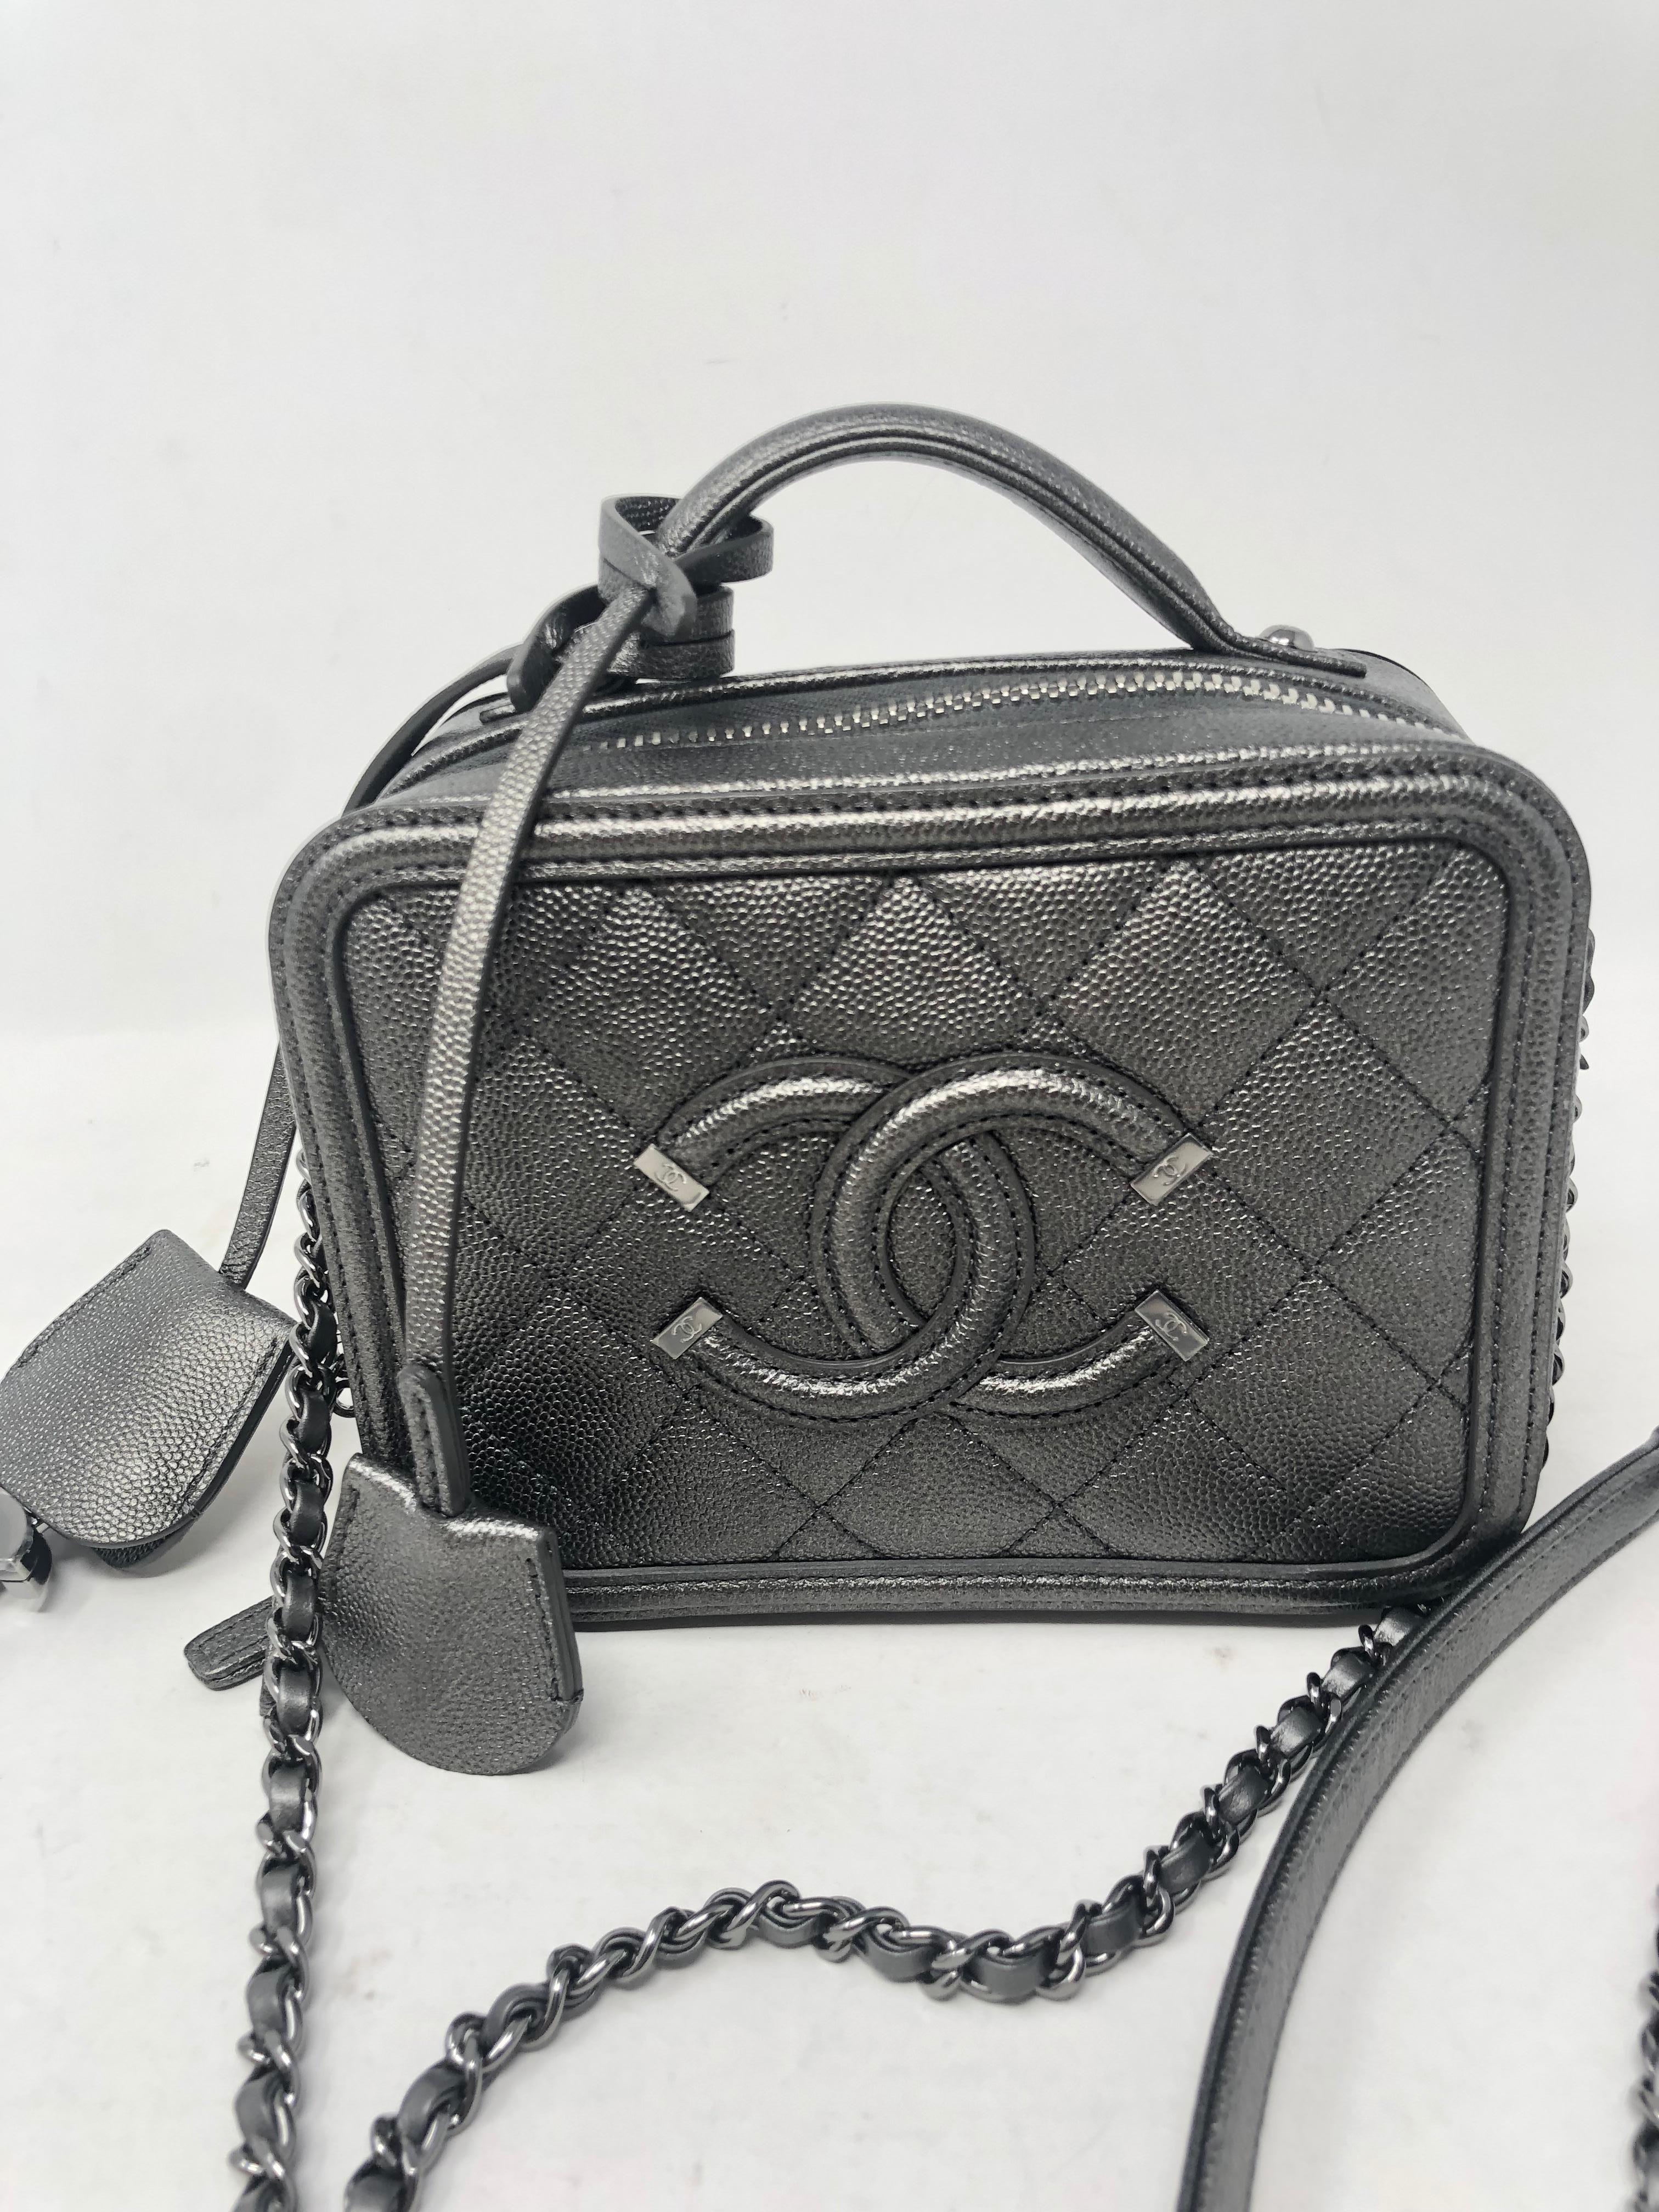 Chanel Gray Metallic Small Vanity Case Crossbody Bag. CC Filigree Caviar leather. Antique silver hardware. Small size vanity crossbody. Rare and limited bag. Brand new condition. Includes authenticity card and dust cover. Guaranteed authentic. 